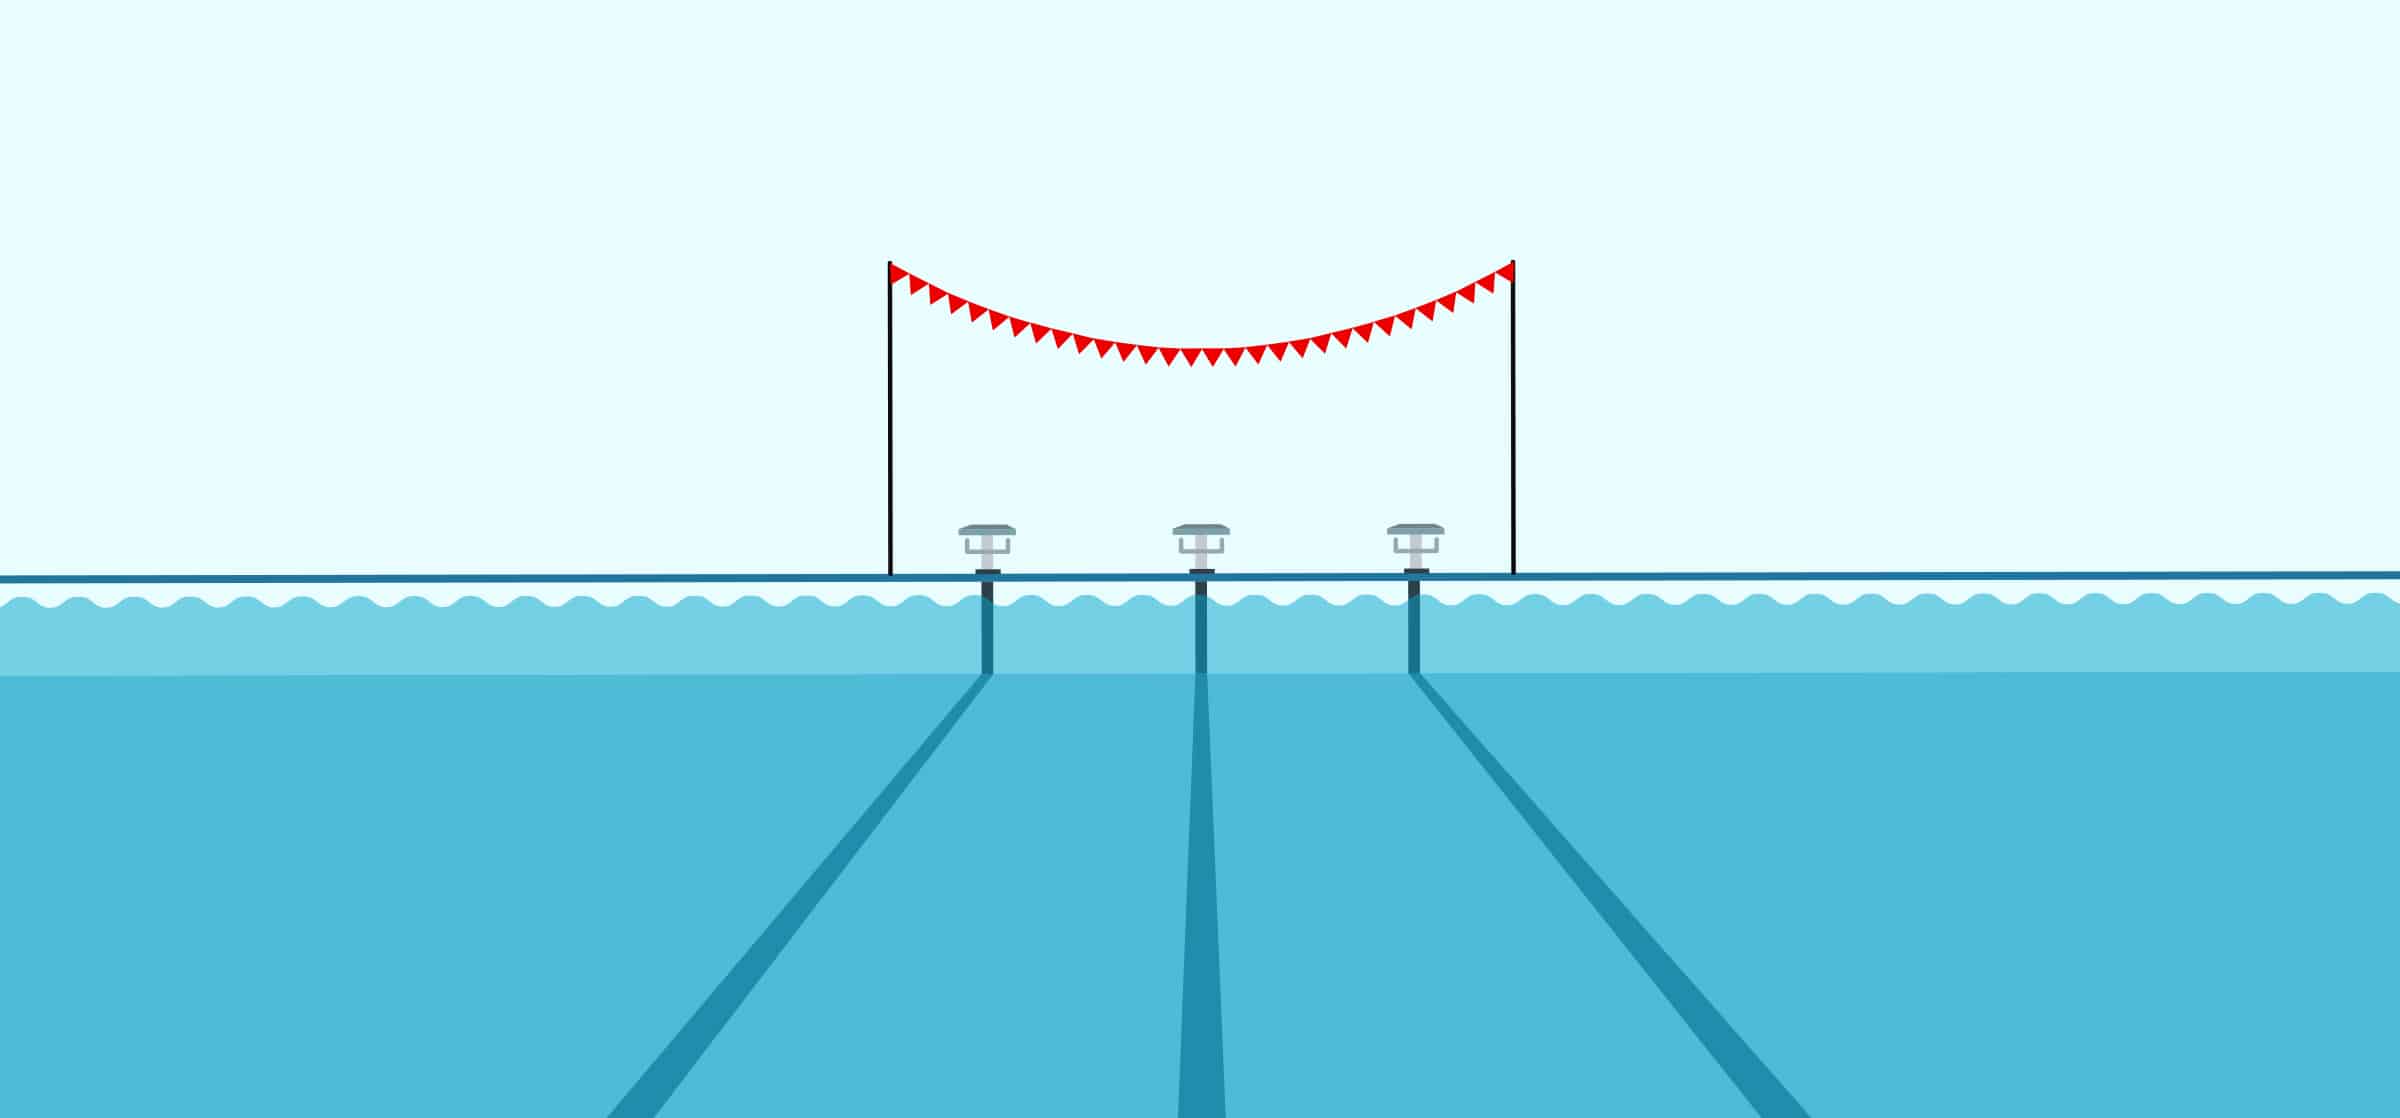 An illustration of a pool with swimming lanes, representing a sprint execution workflow.